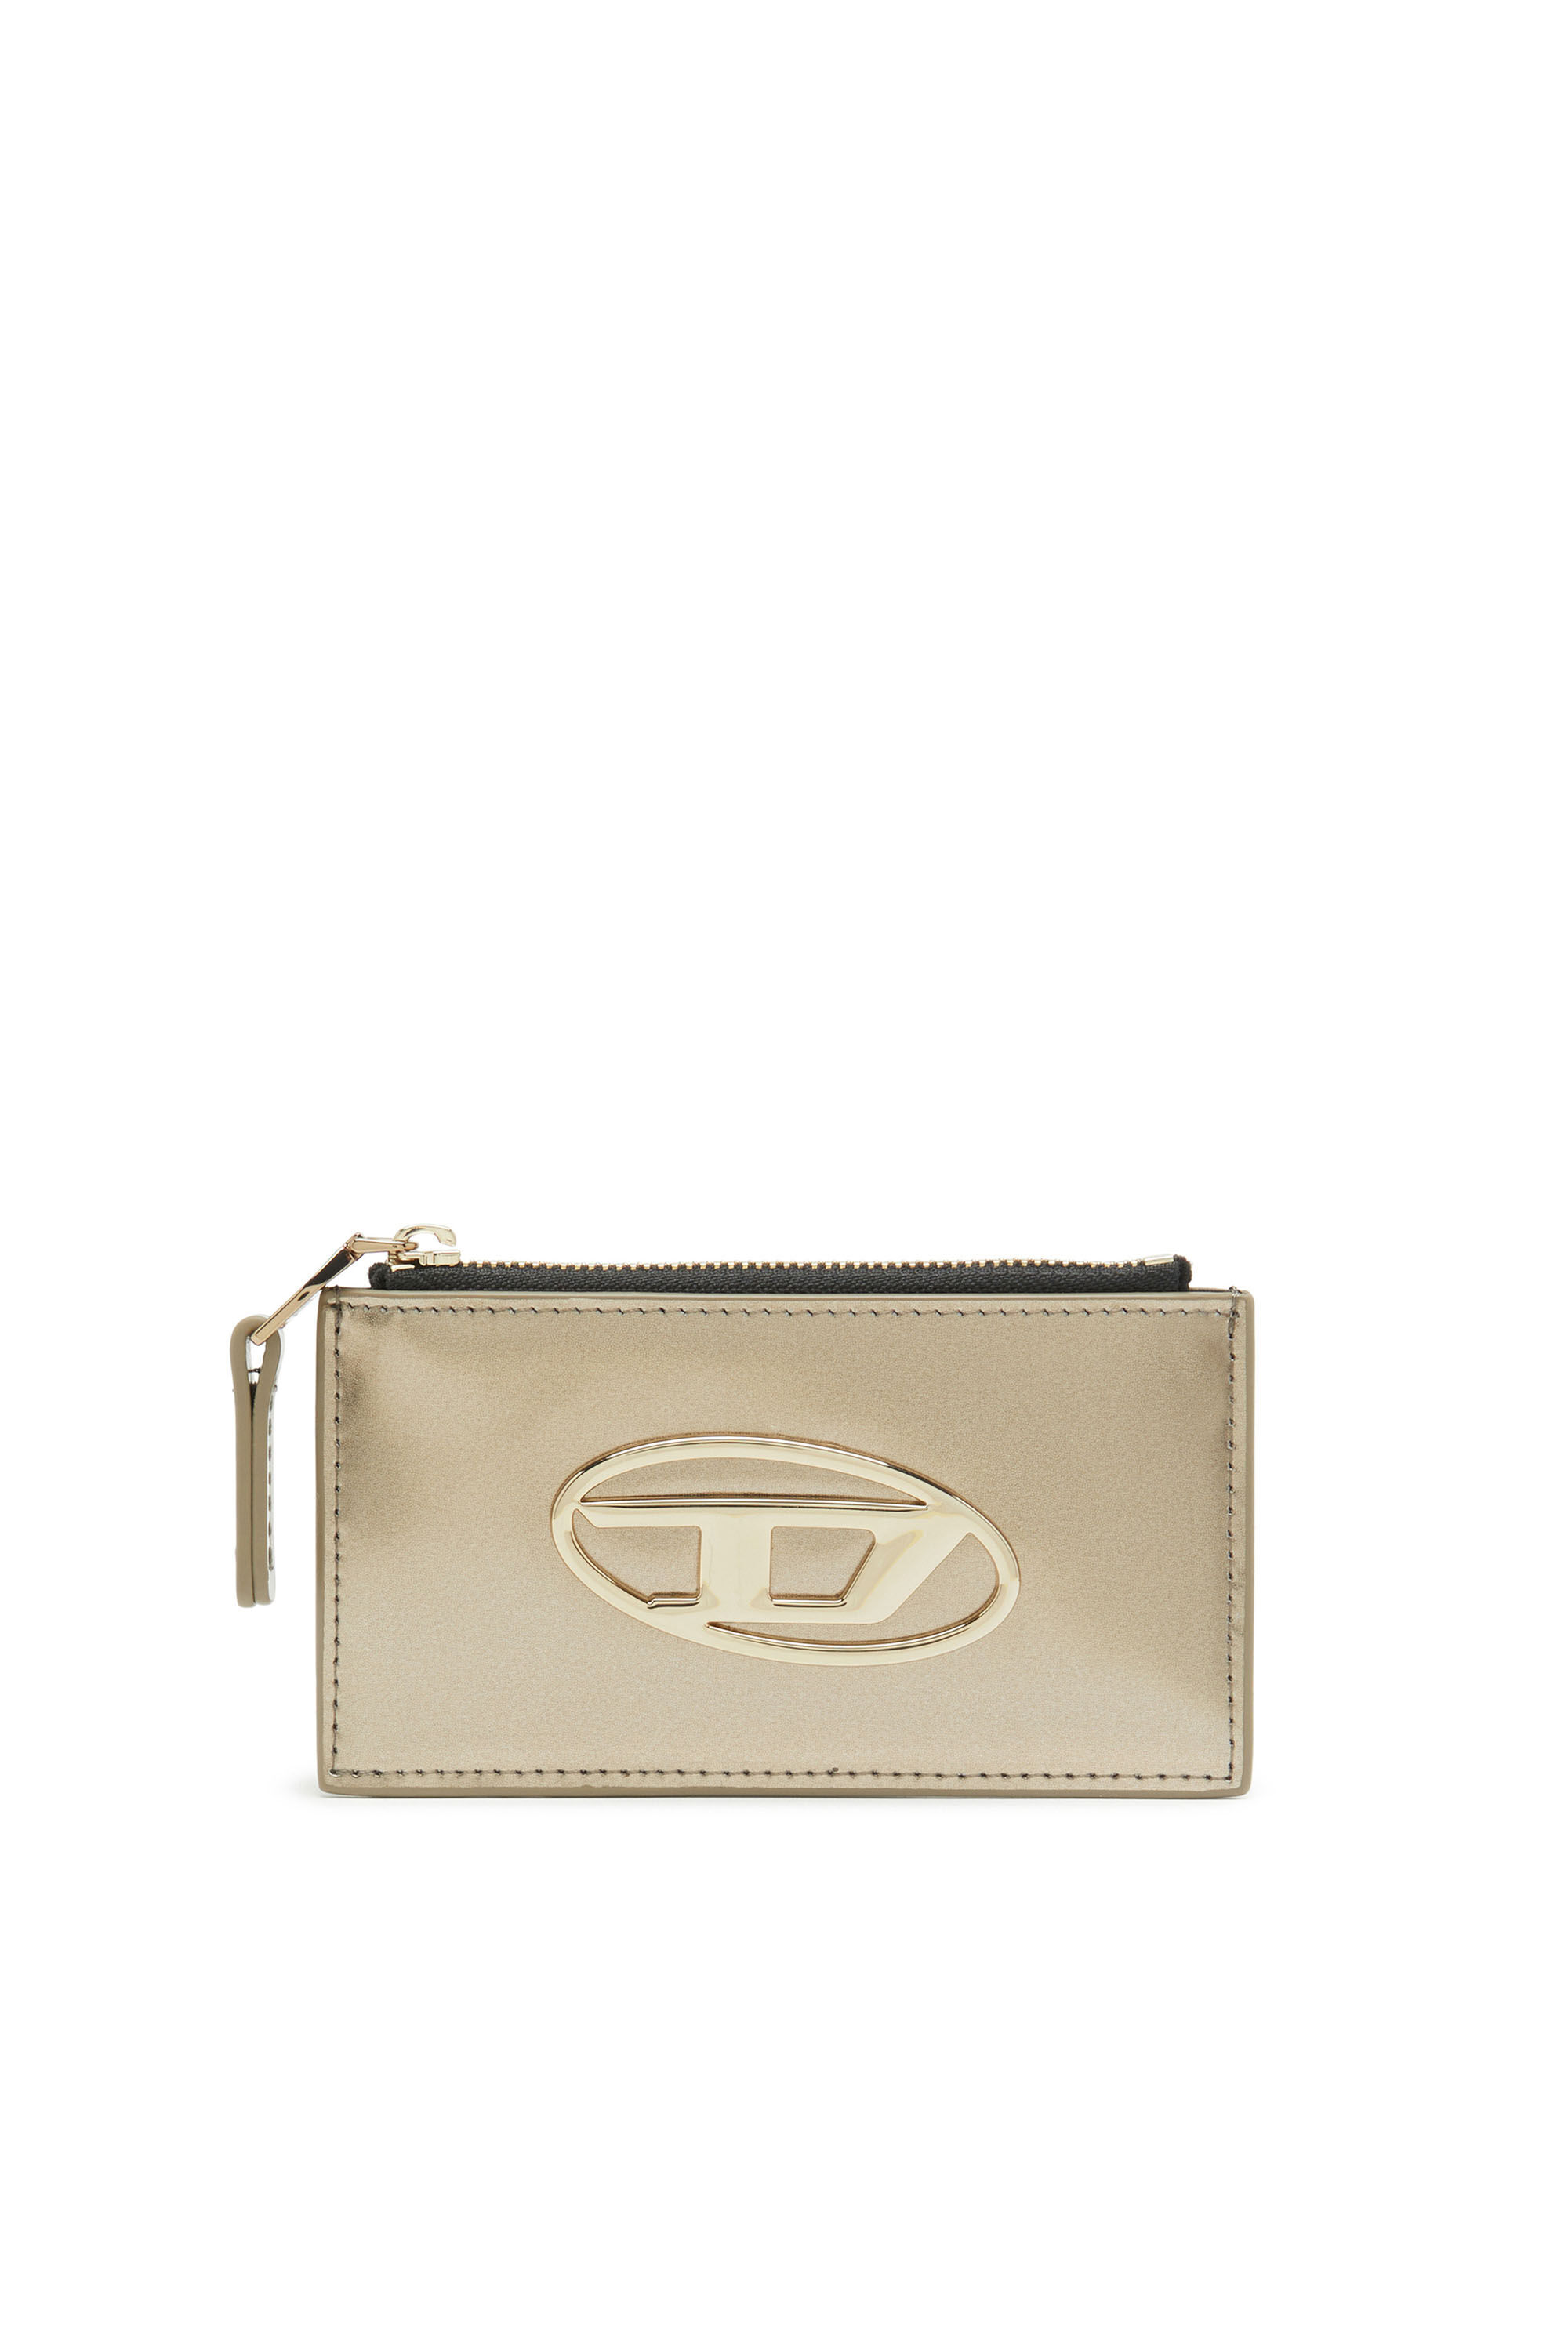 Diesel - CARD HOLDER COIN S, ブロンズ - Image 1